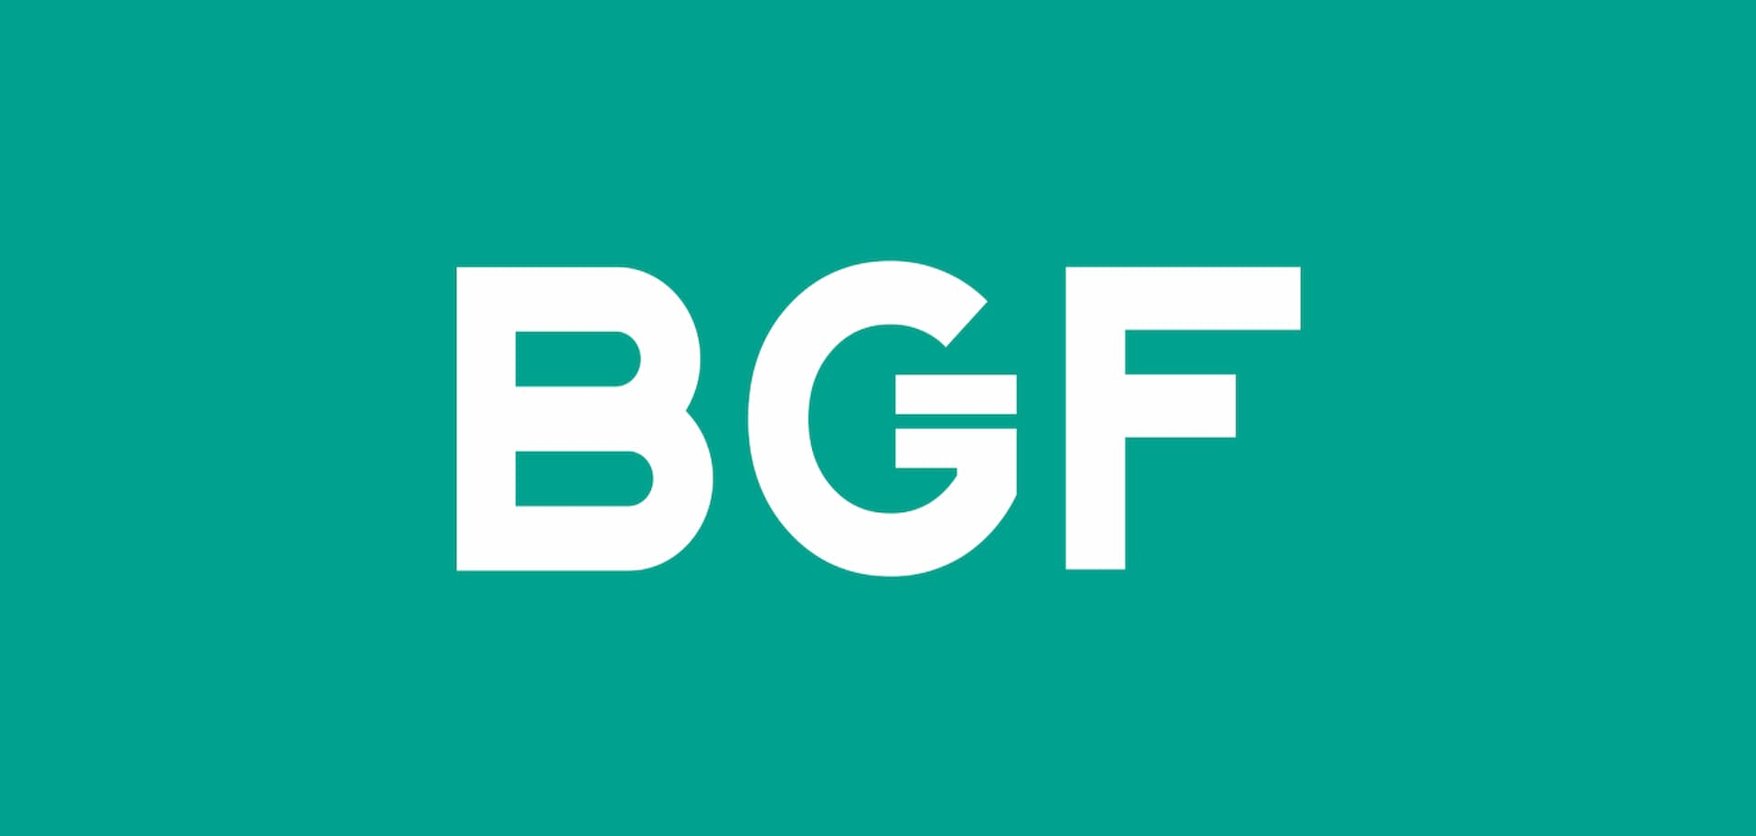 AND Digital Receives £8m Investment From BGF(1)